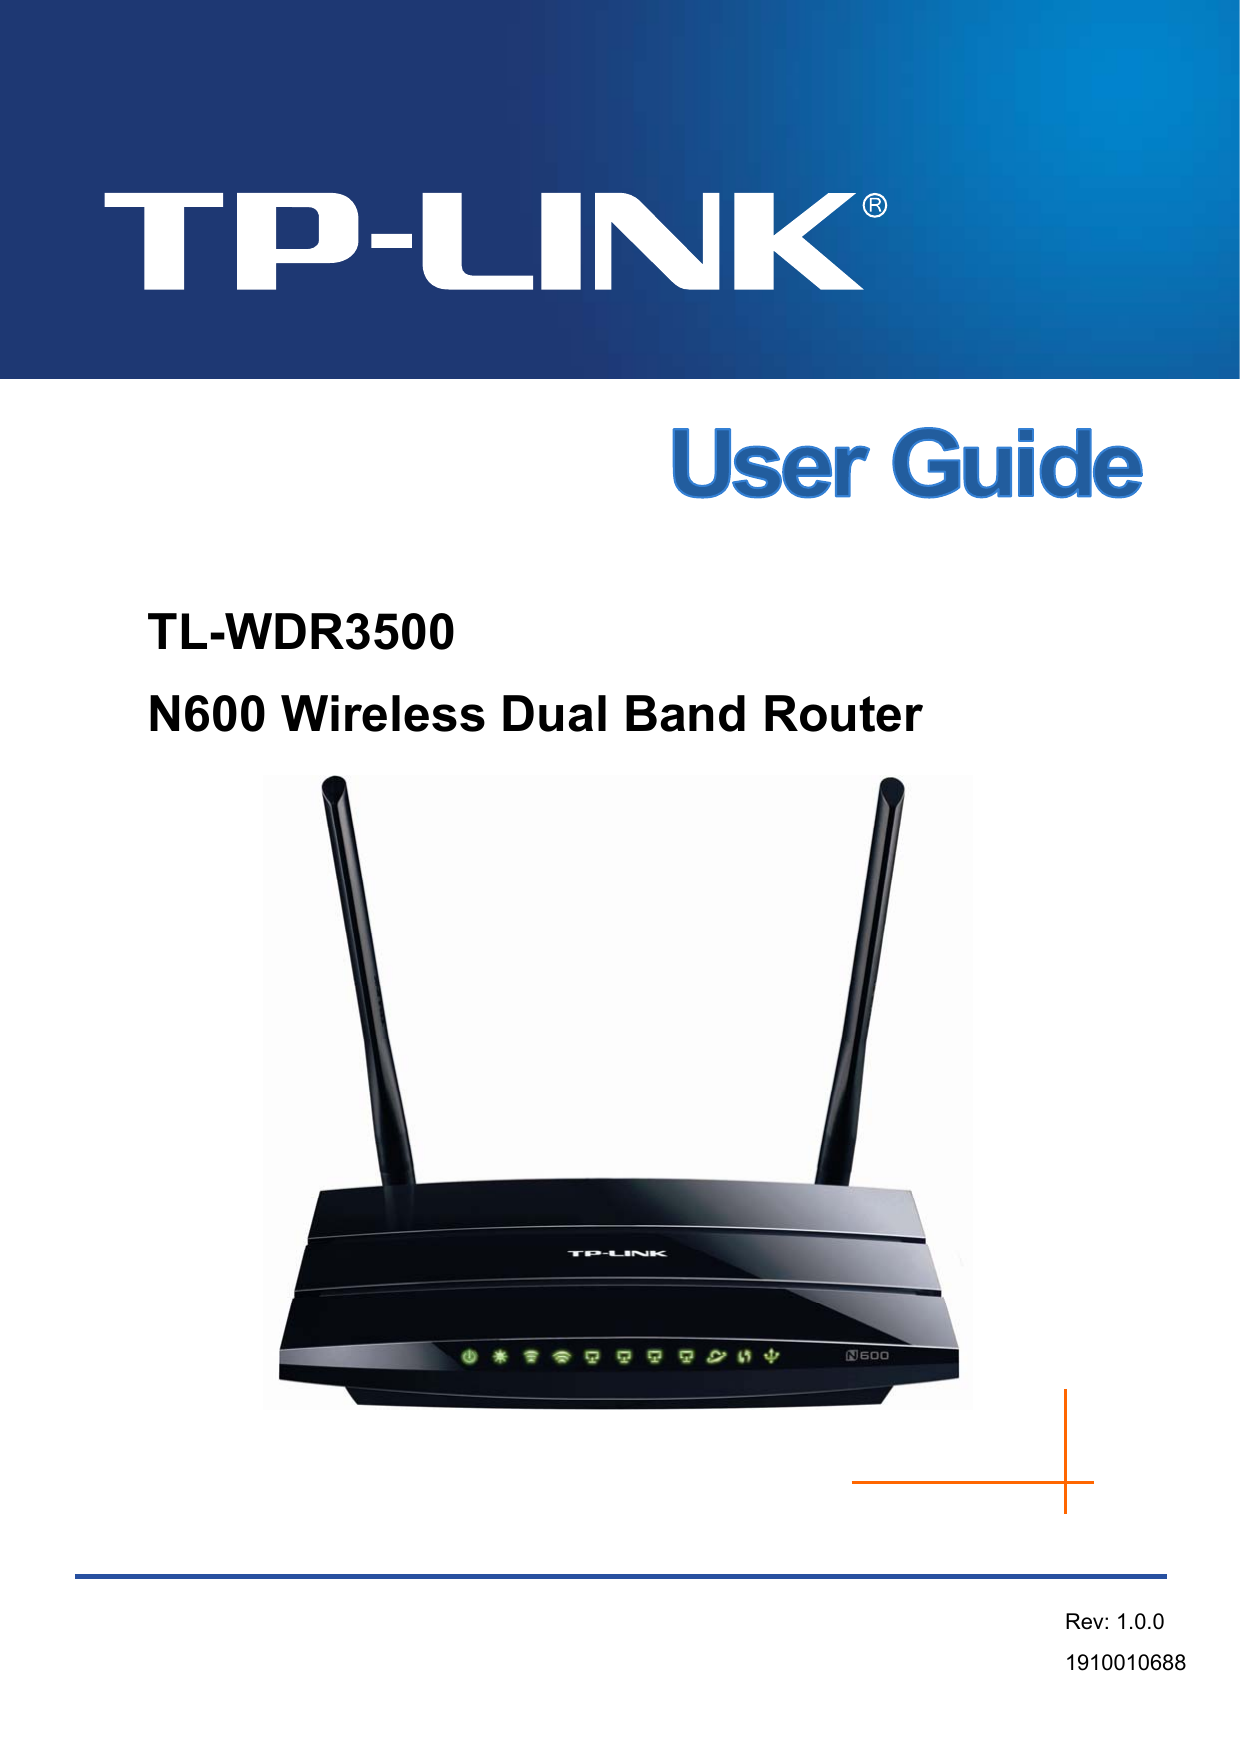    TL-WDR3500 N600 Wireless Dual Band Router   Rev: 1.0.0 1910010688   